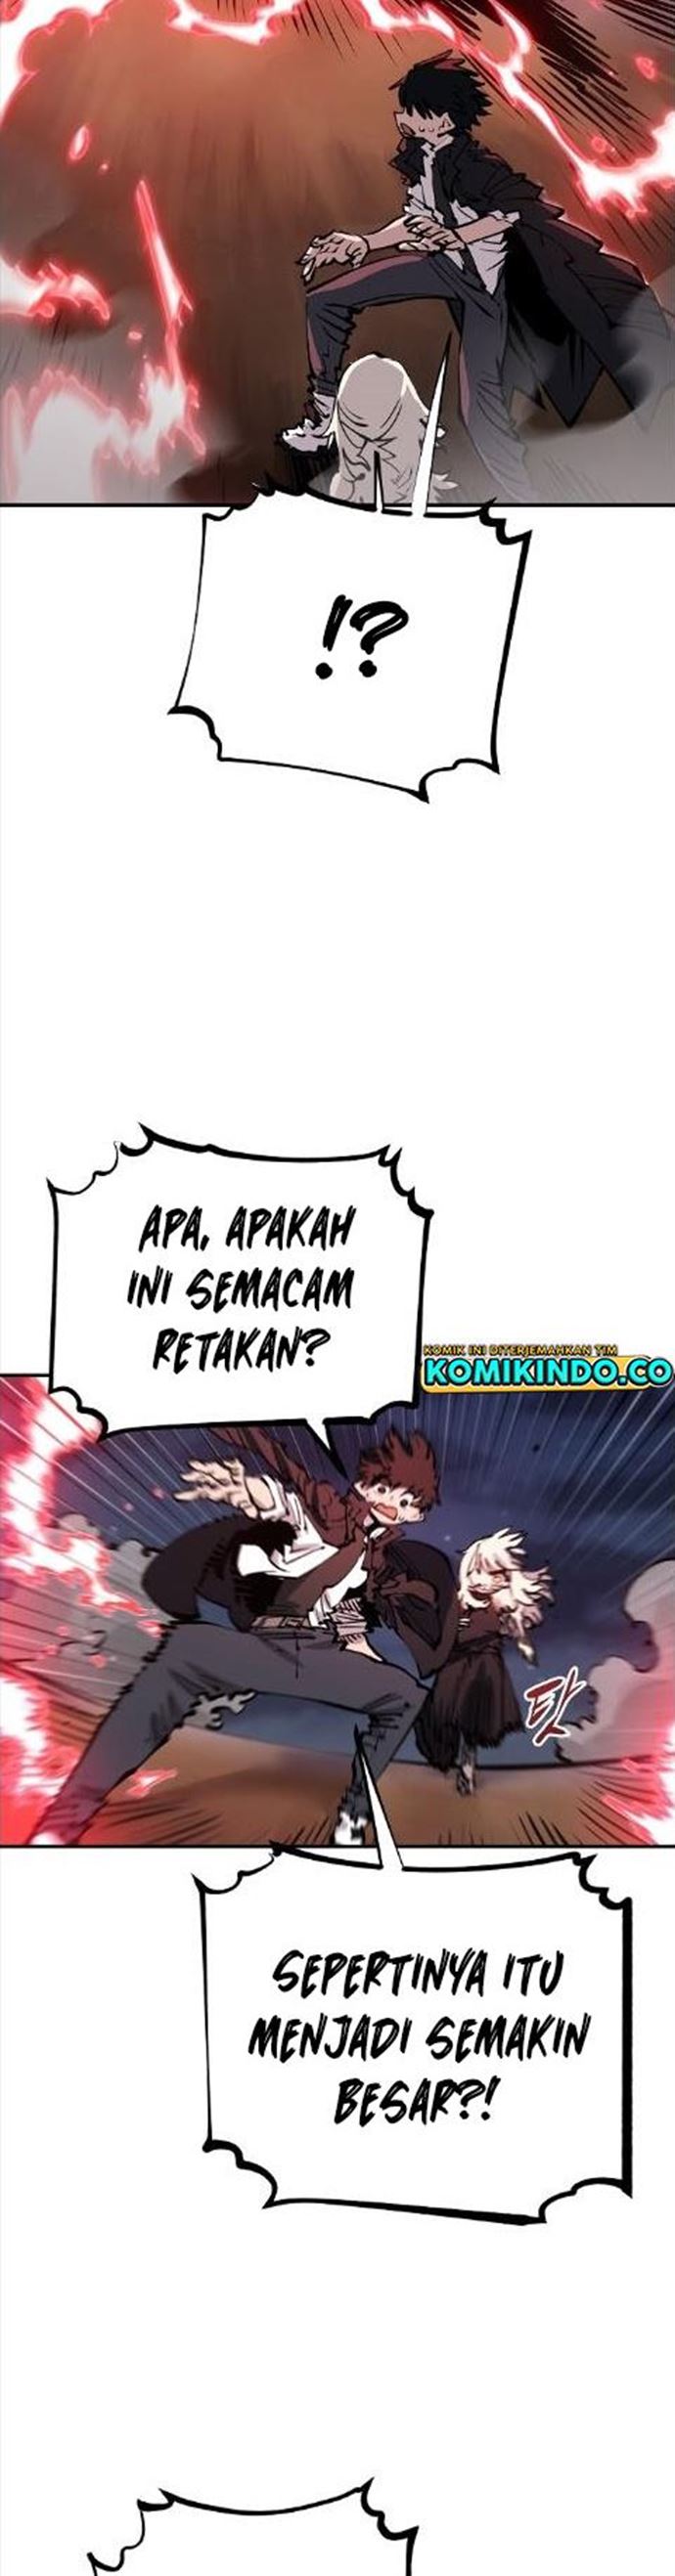 Player Chapter 100 Bahasa Indonesia